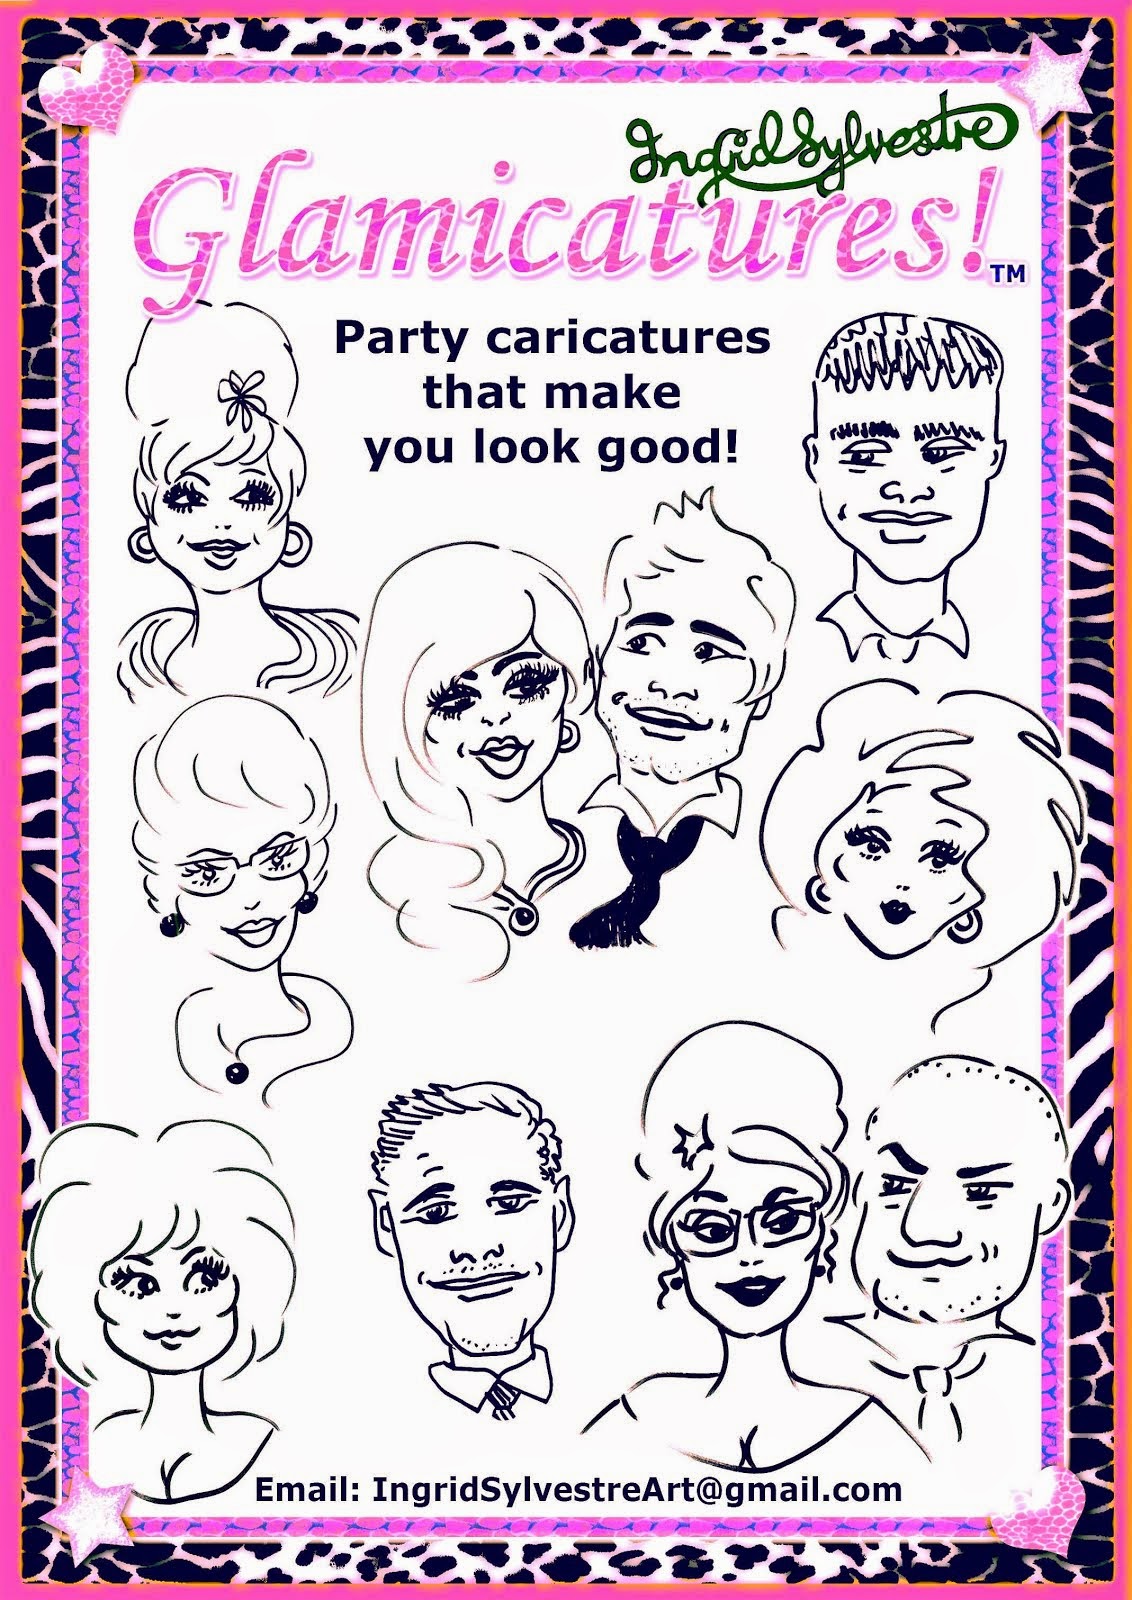 North East Wedding Entertainment - Glamicatures TM  Caricatures that make you look good!